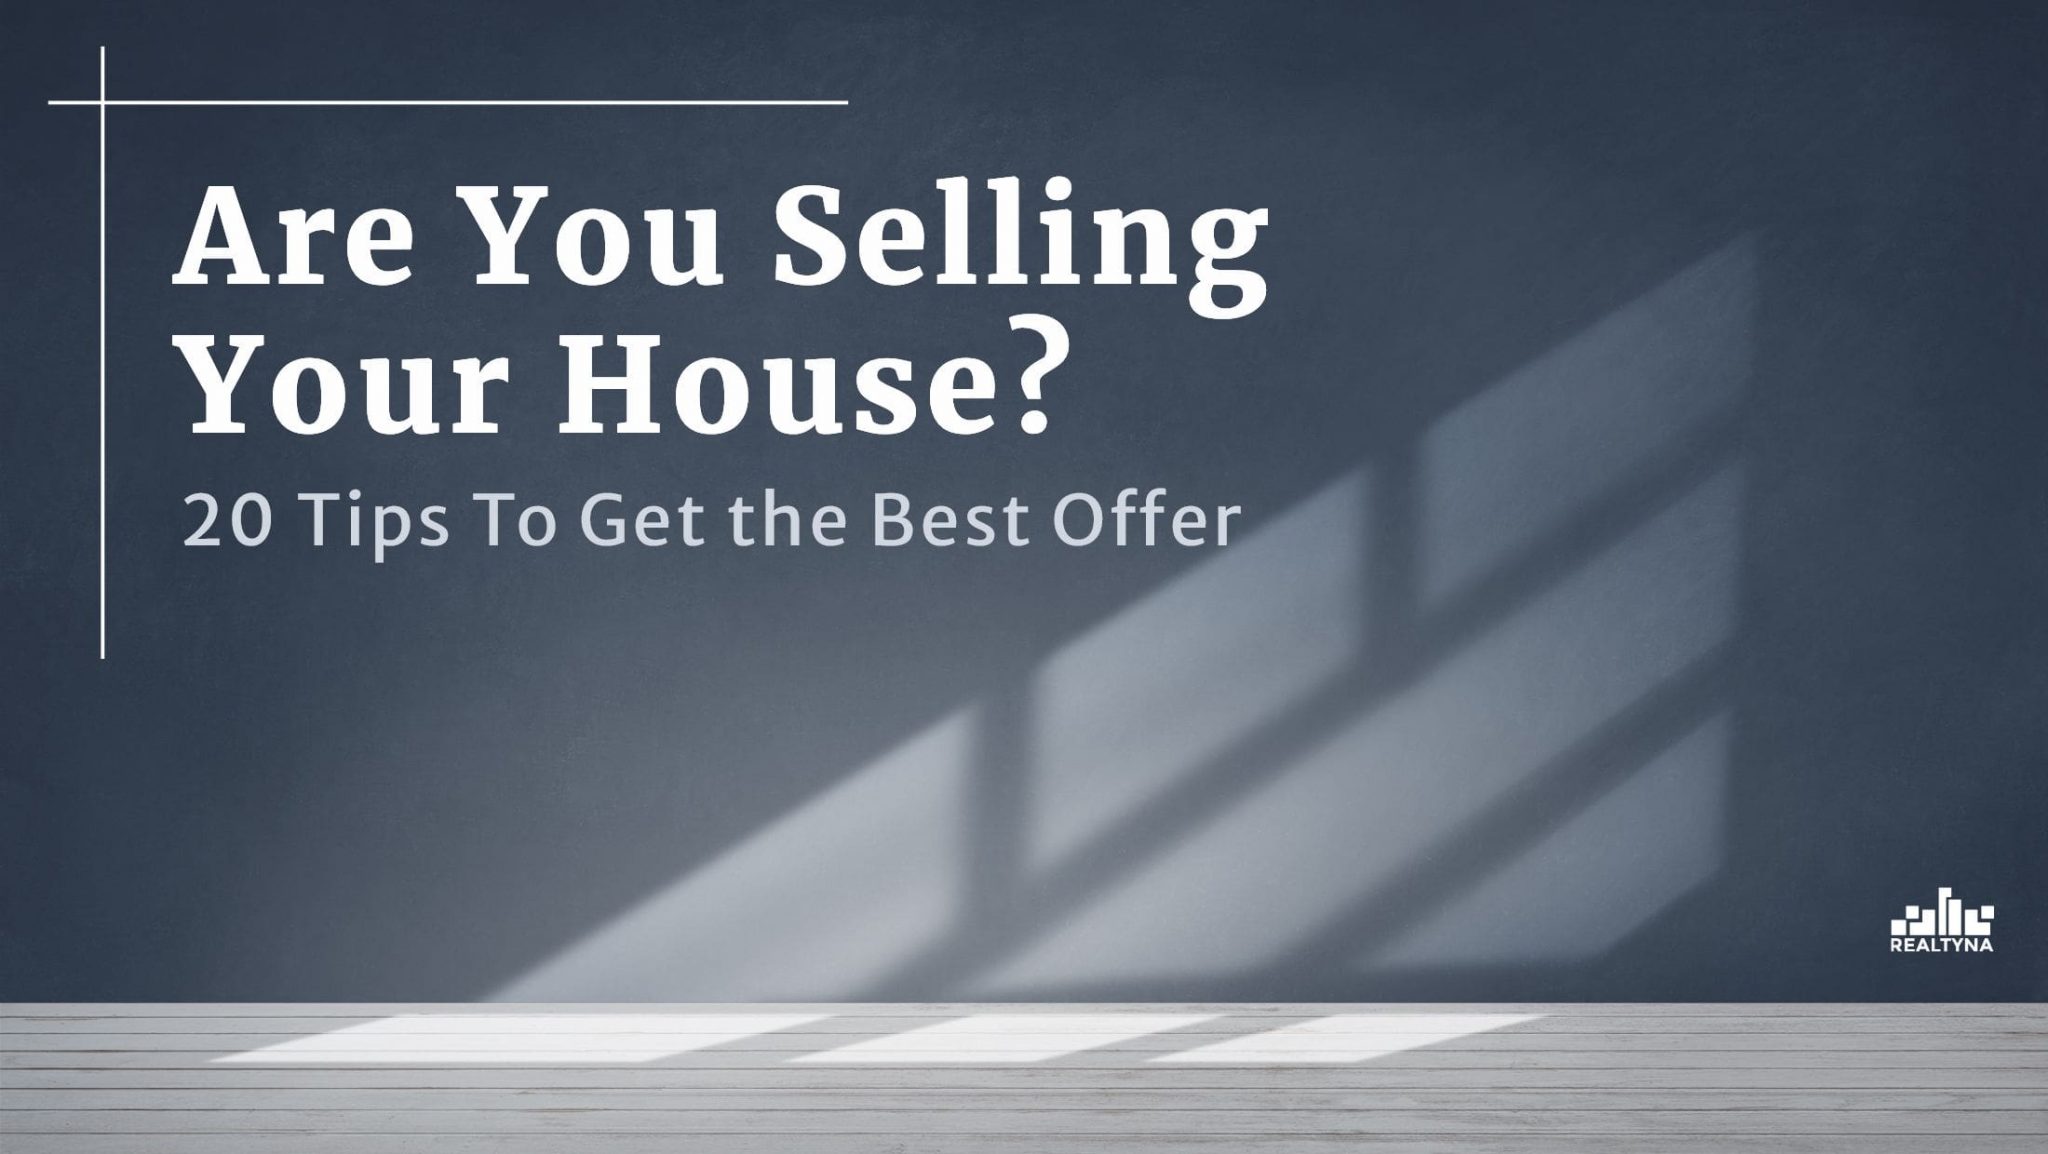 Are-You-Selling-Your-House-Some-Tips-To-Get-the-Best-Offer-2048x1154.jpeg